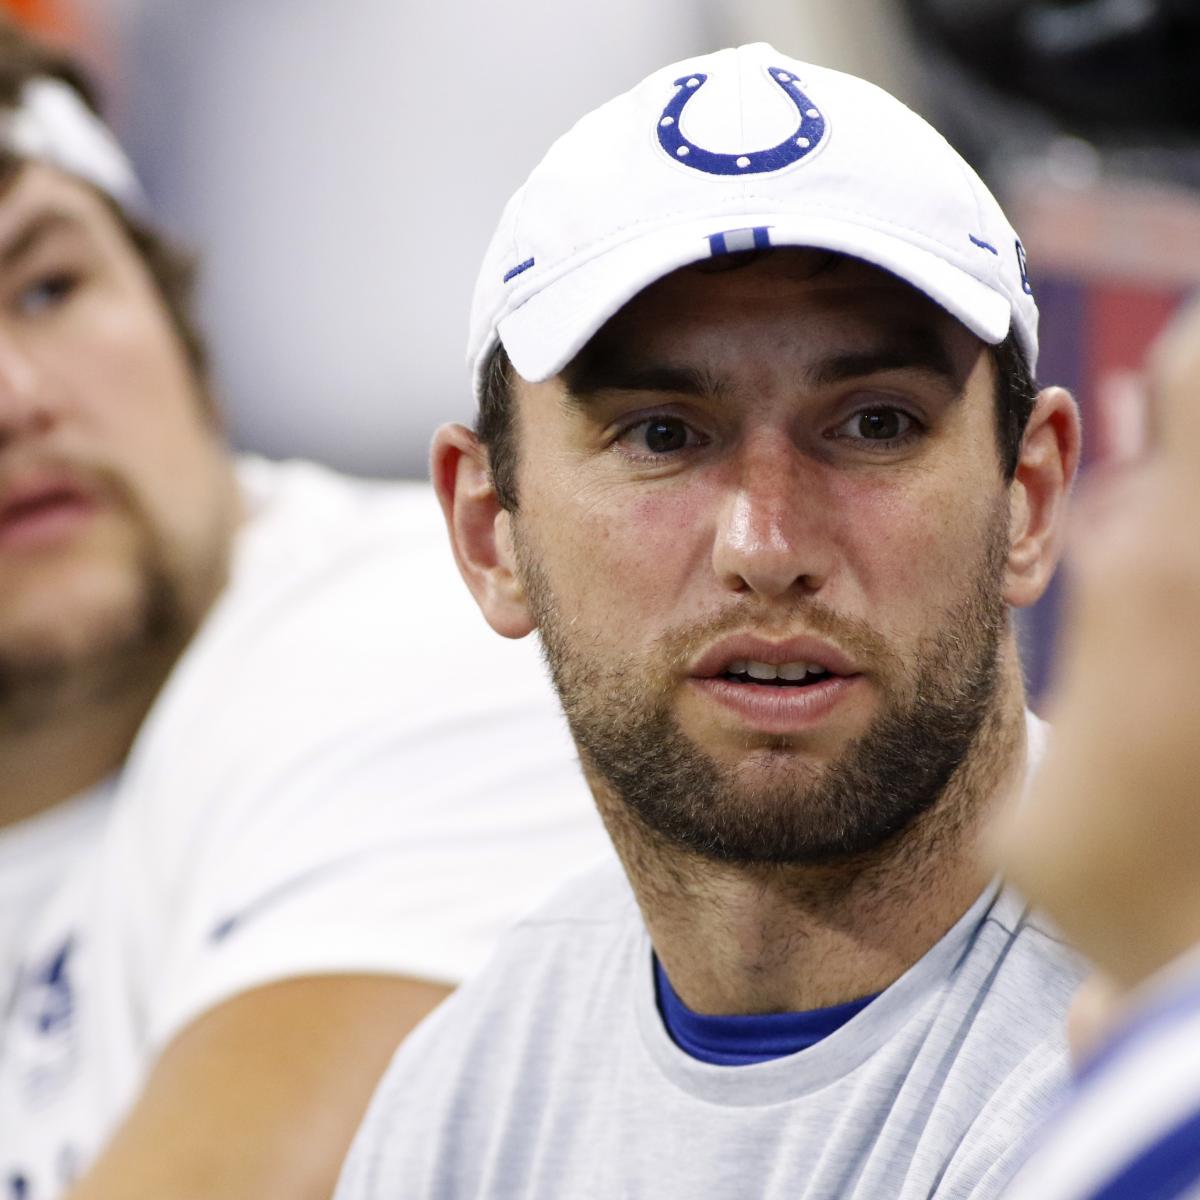 2020 NFL Super Bowl Odds: Colts Go from 15-1 to 30-1 After Andrew Luck